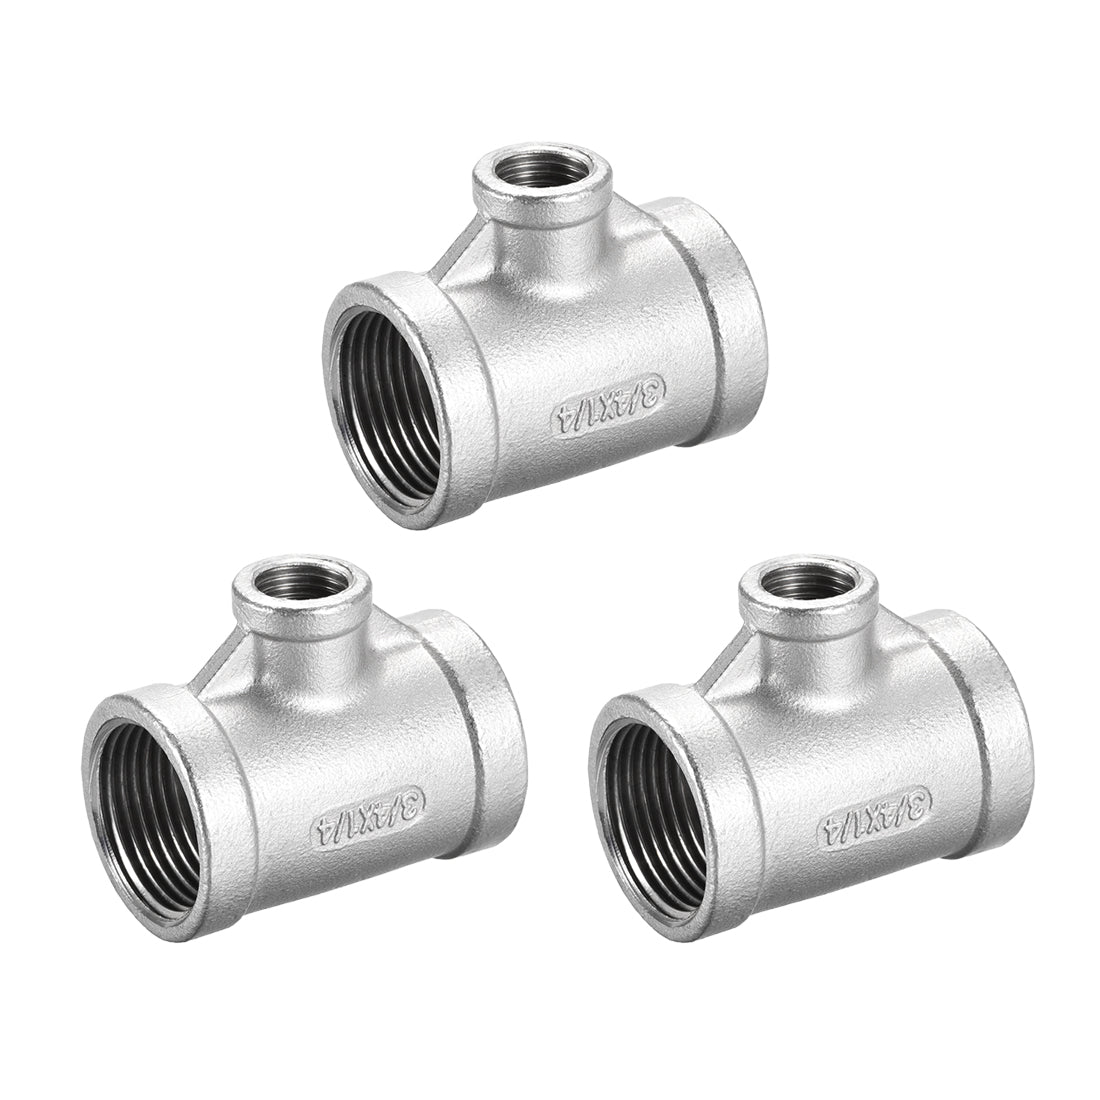 uxcell Uxcell Stainless Steel 304 Cast  Pipe Fitting 3/4 BSPT x 1/4 BSPT x 3/4 BSPT Female Tee Shaped Connector Coupler 3pcs